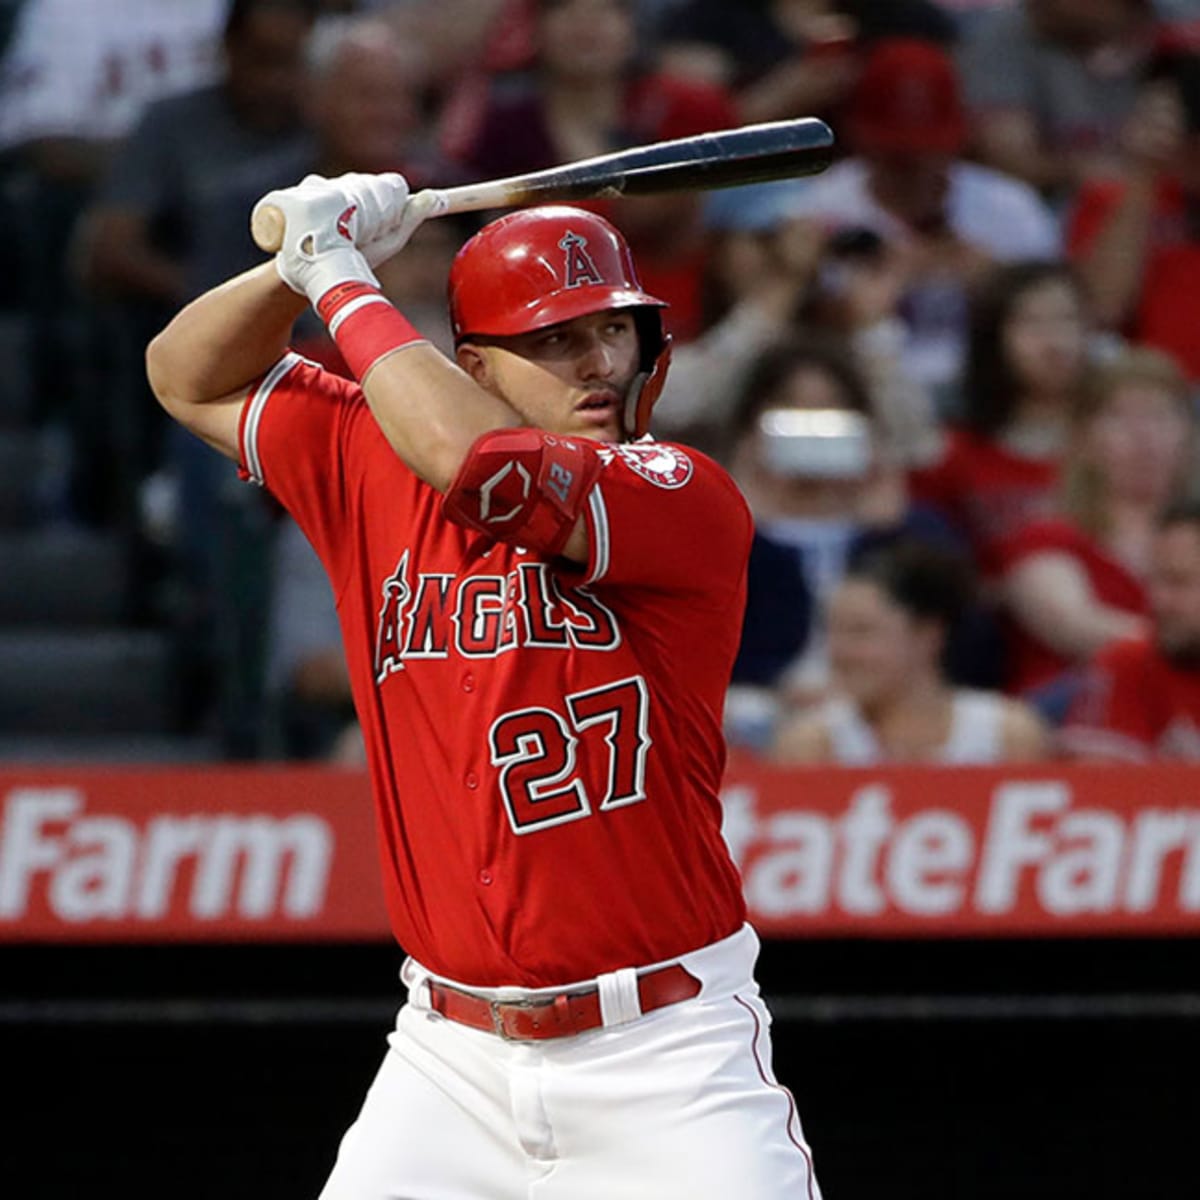 Mike Trout has been CRUSHING baseballs! He's up to 11 homers on